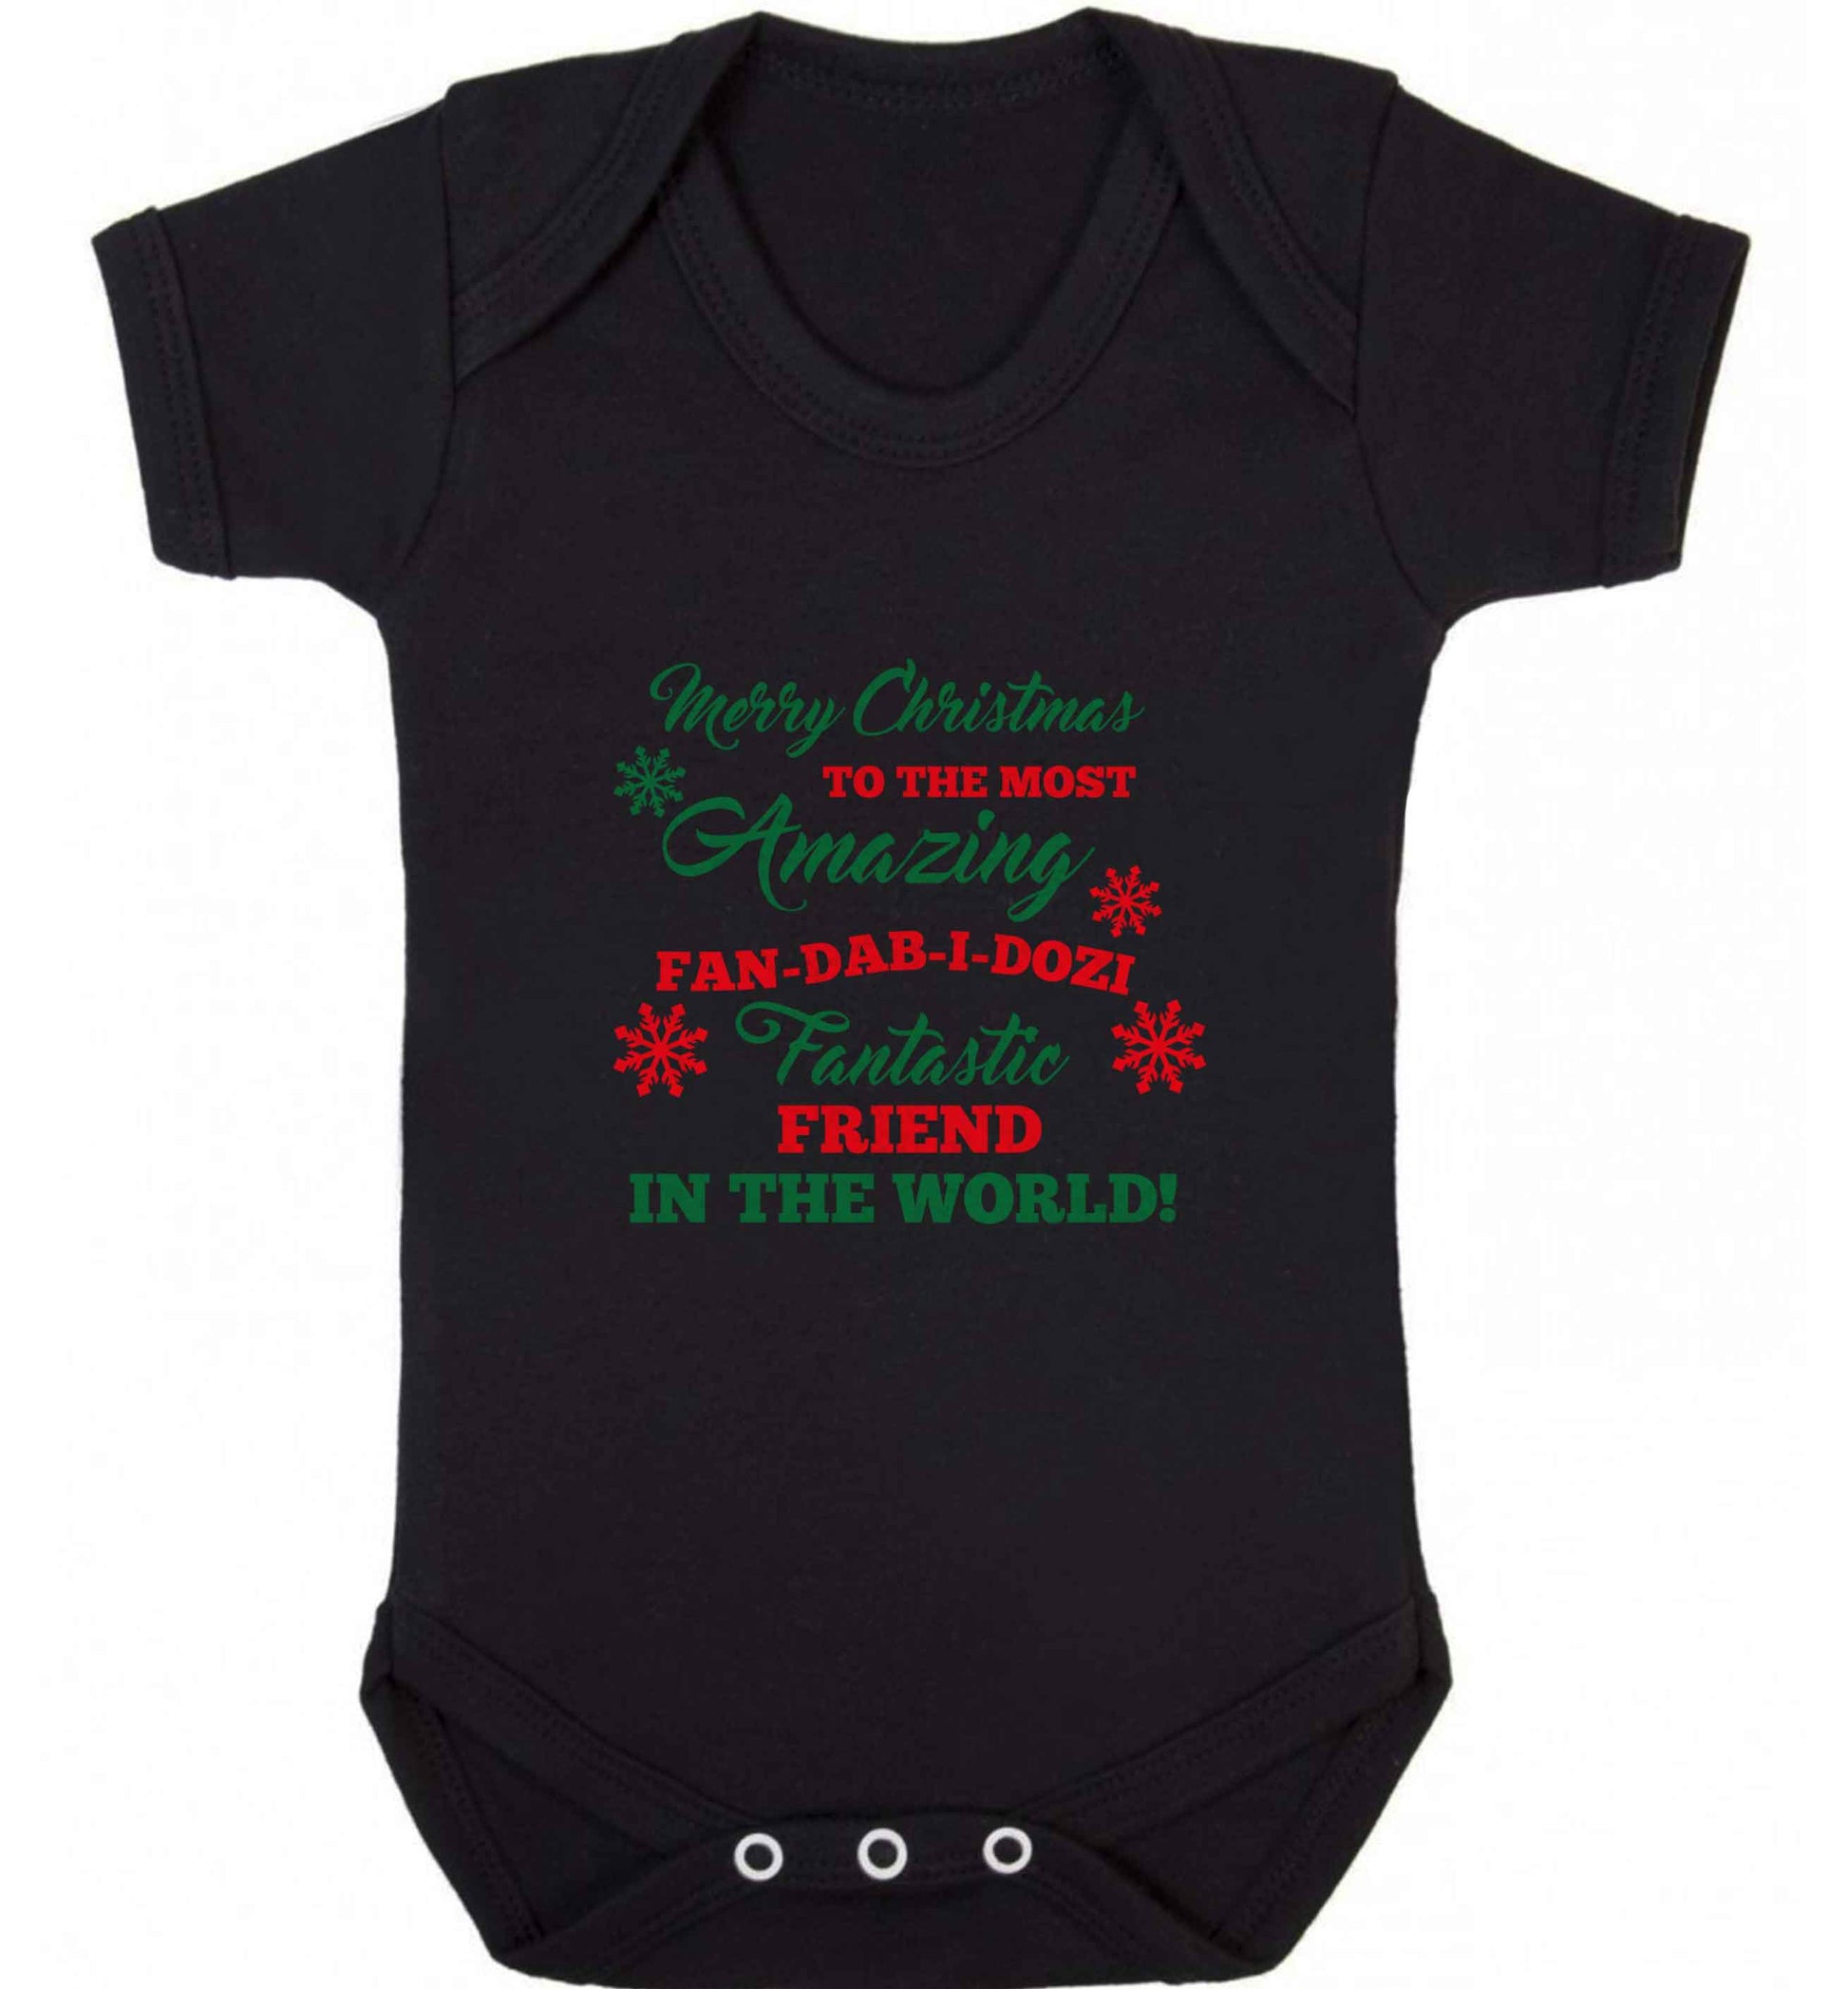 Merry Christmas to the most amazing fan-dab-i-dozi fantasic friend in the world baby vest black 18-24 months